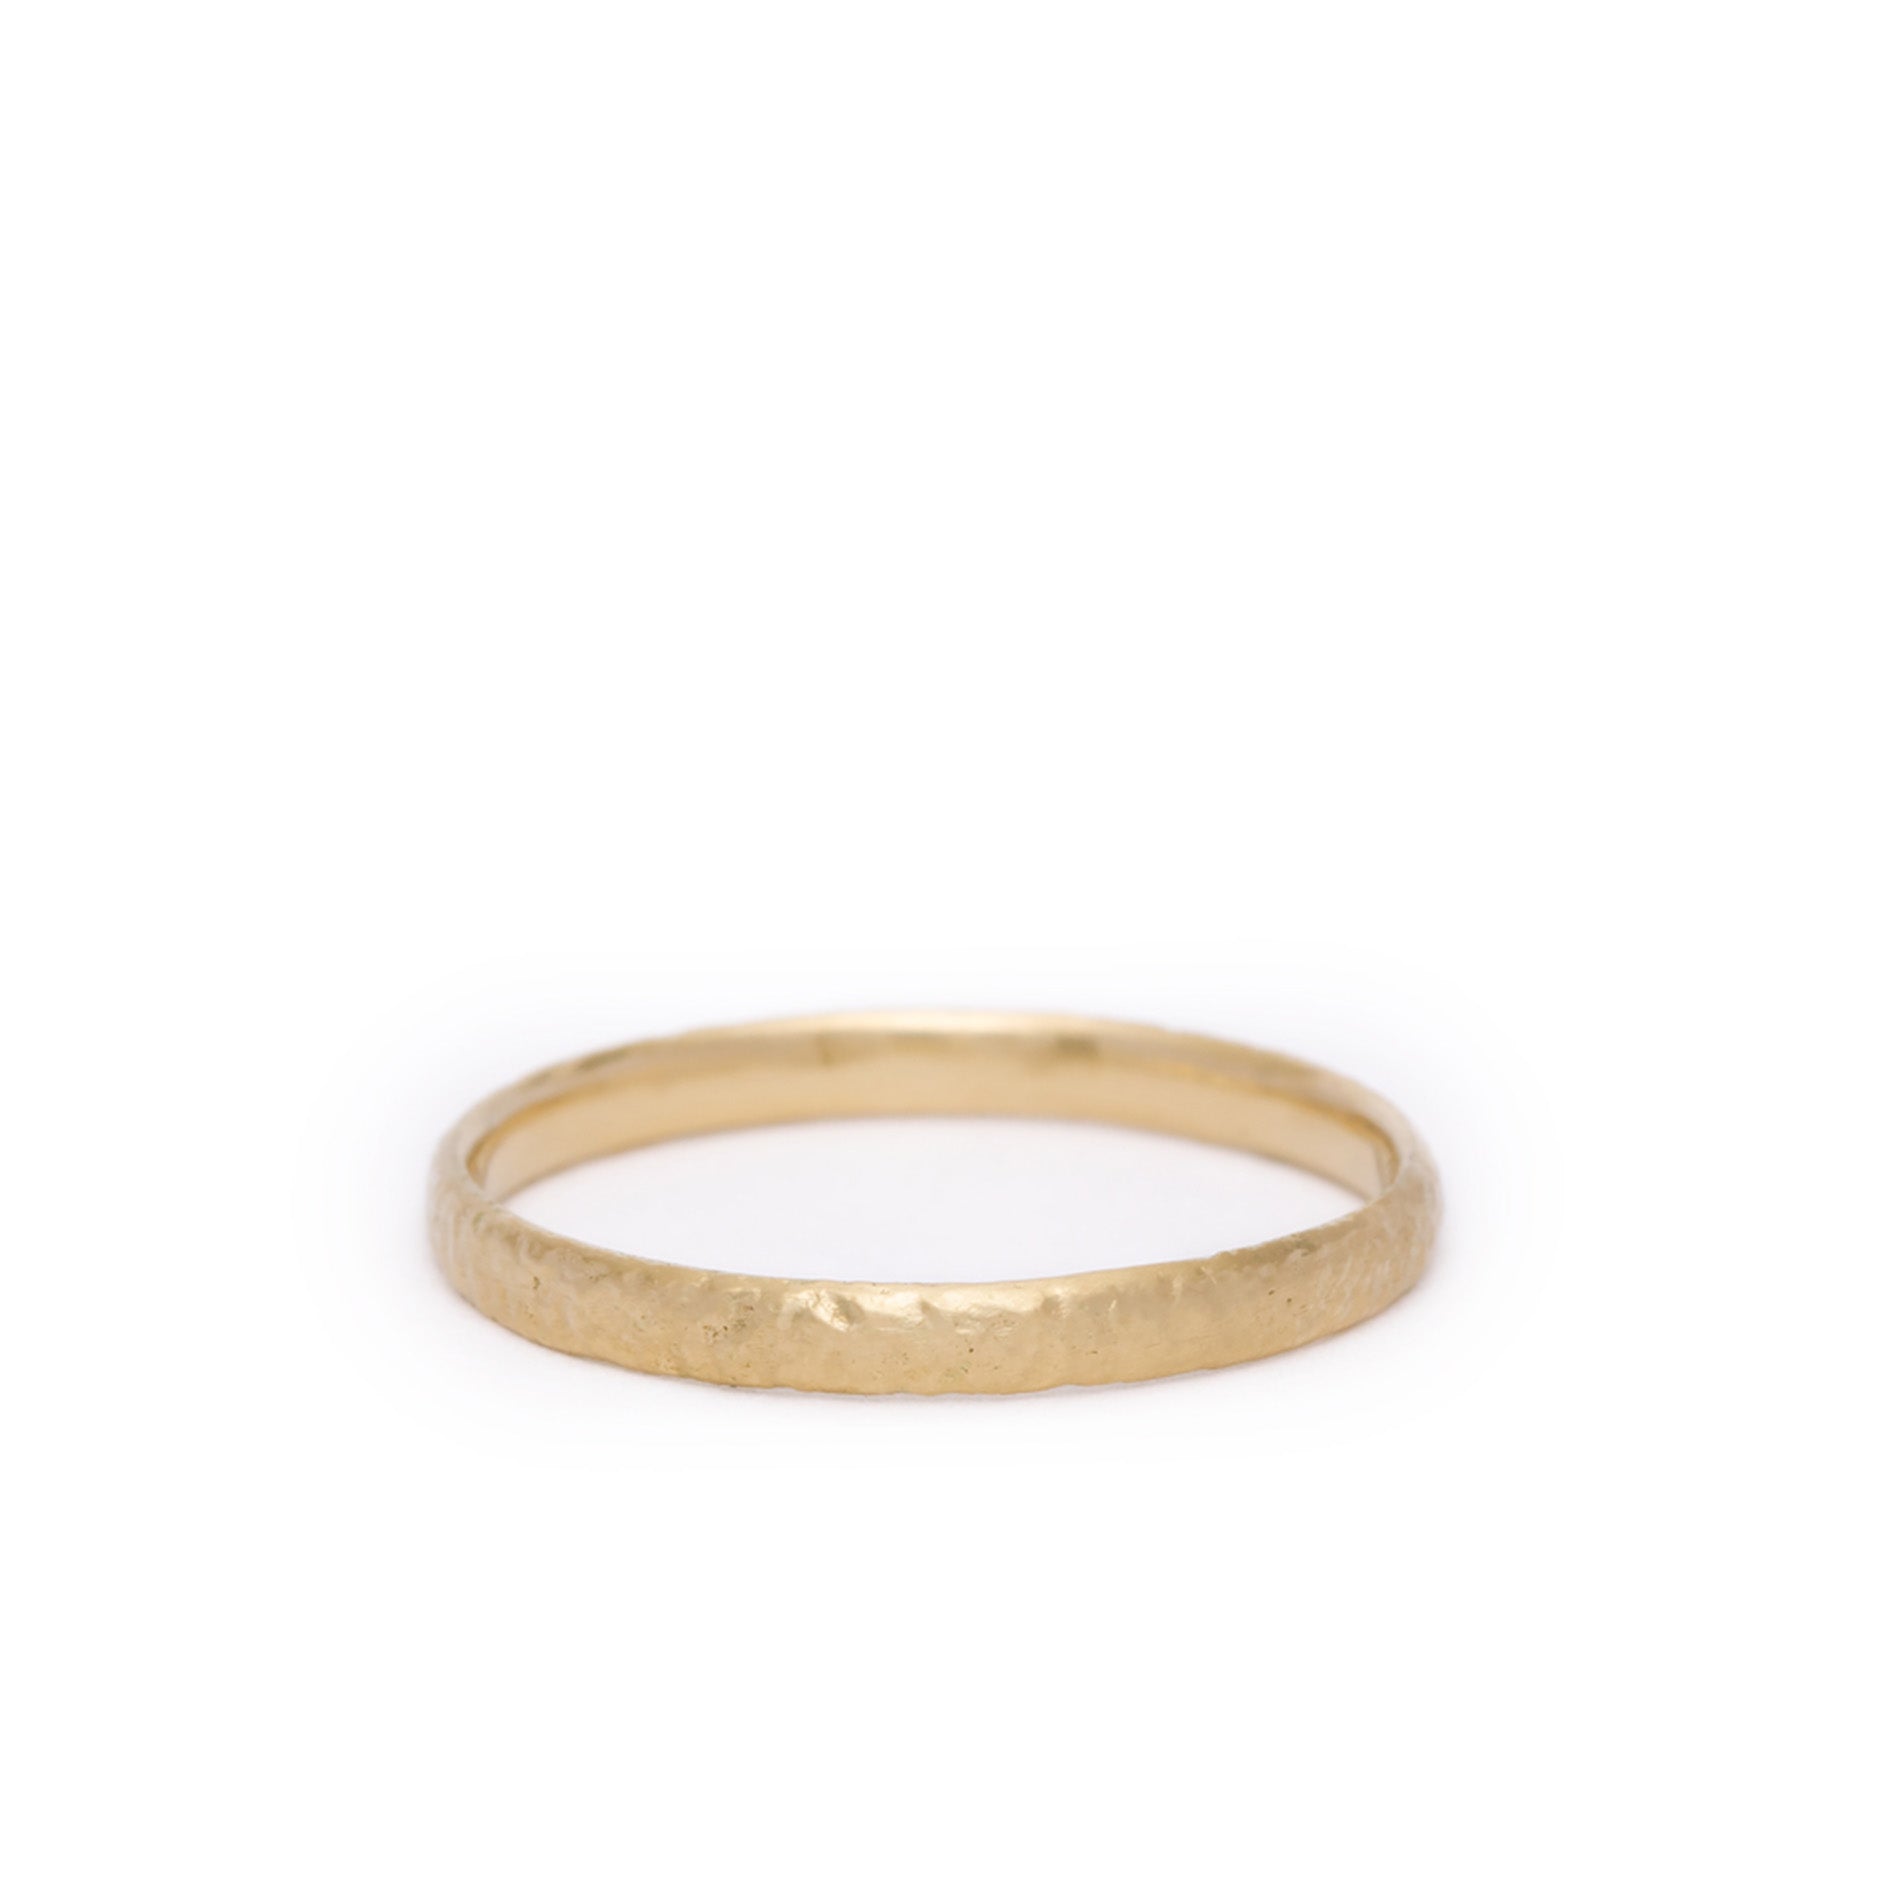 Scattered Gold Wedding Ring 2mm